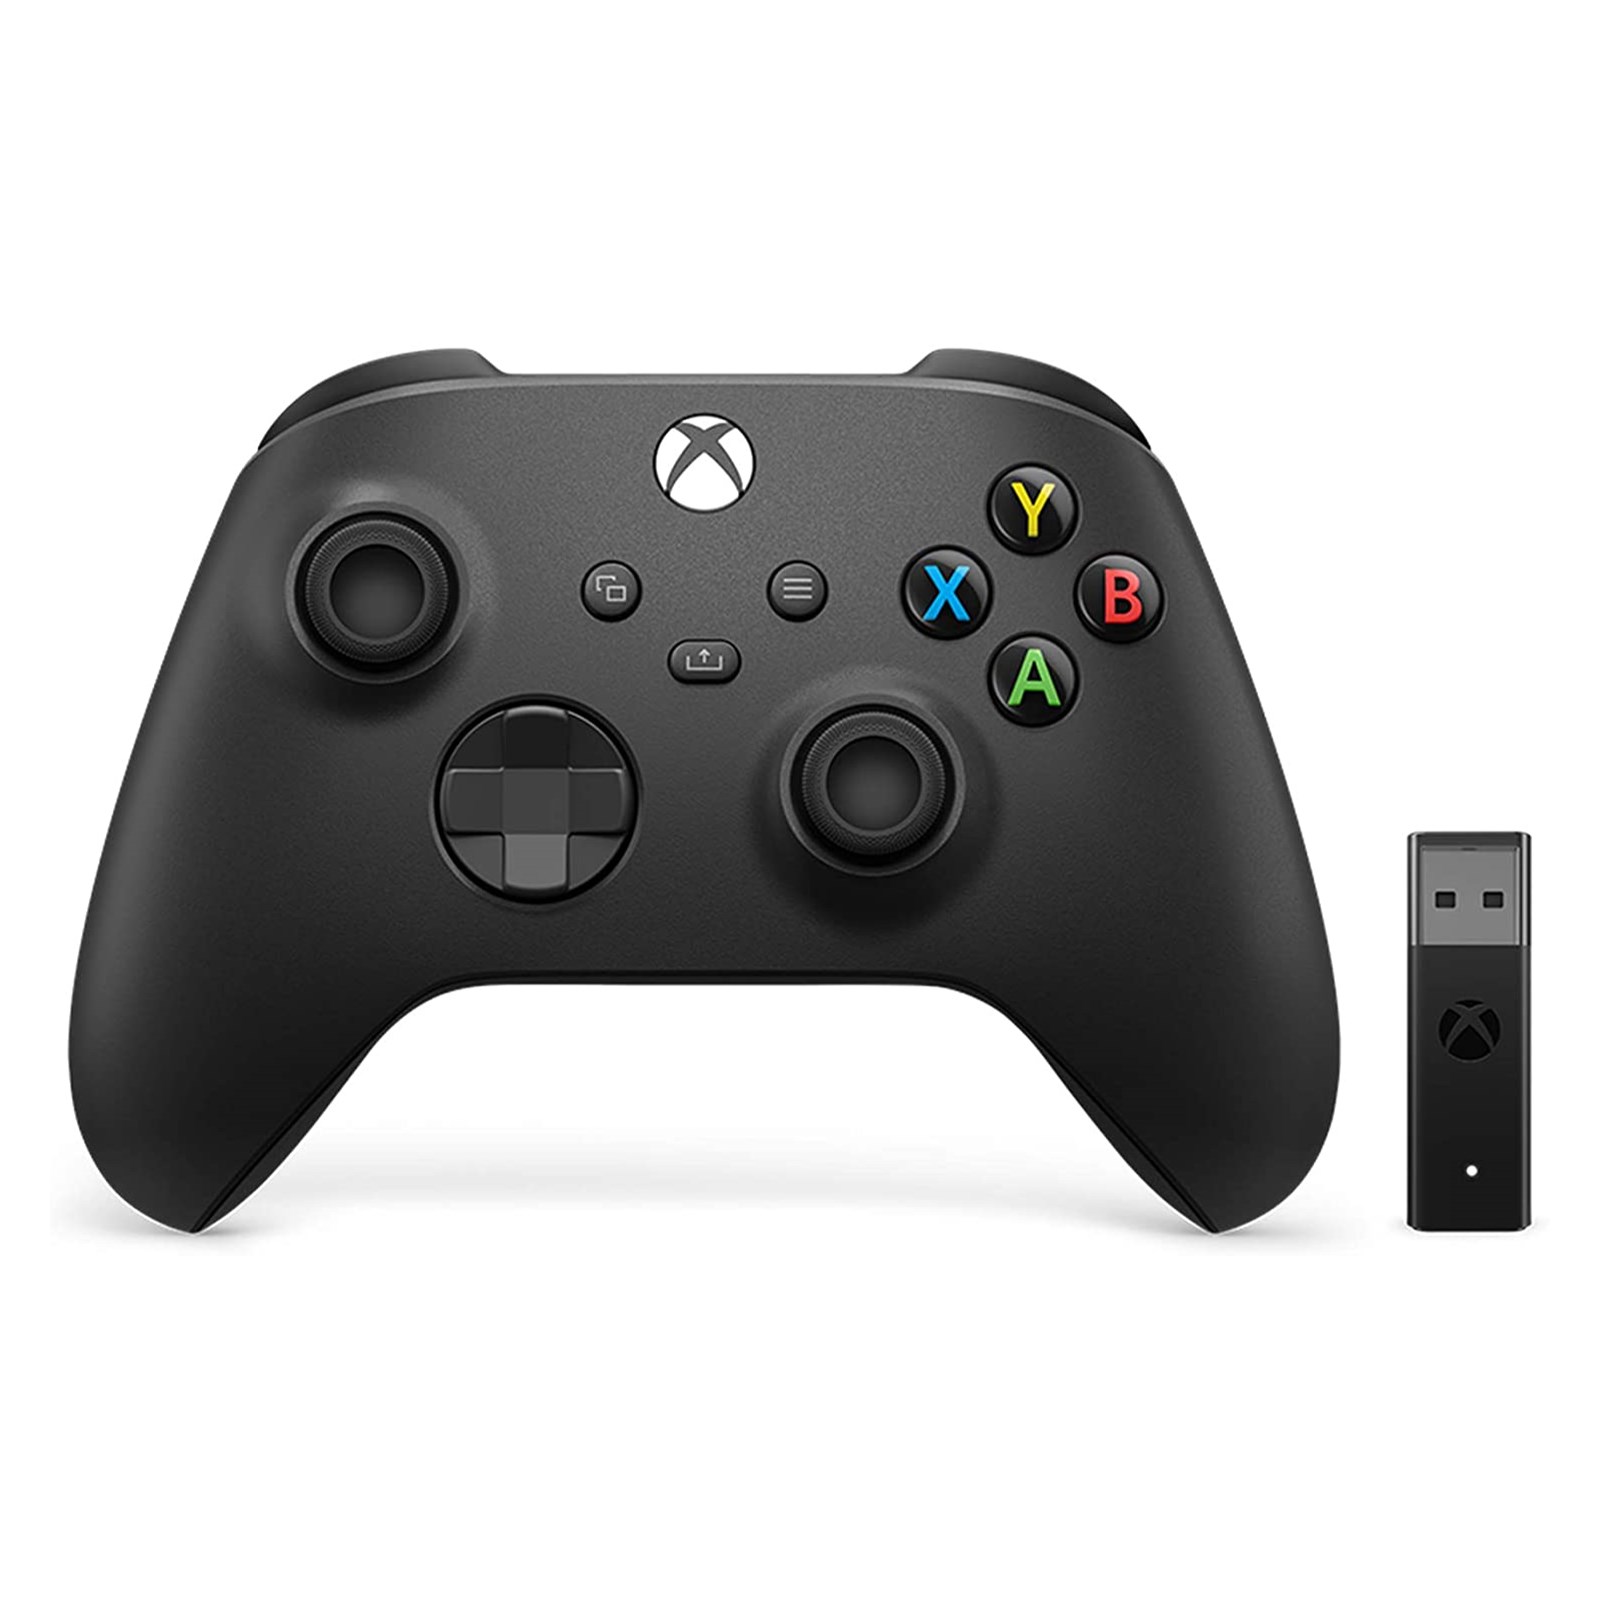 Microsoft Wireless Controller and USB Wireless Adapter For Windows PC's